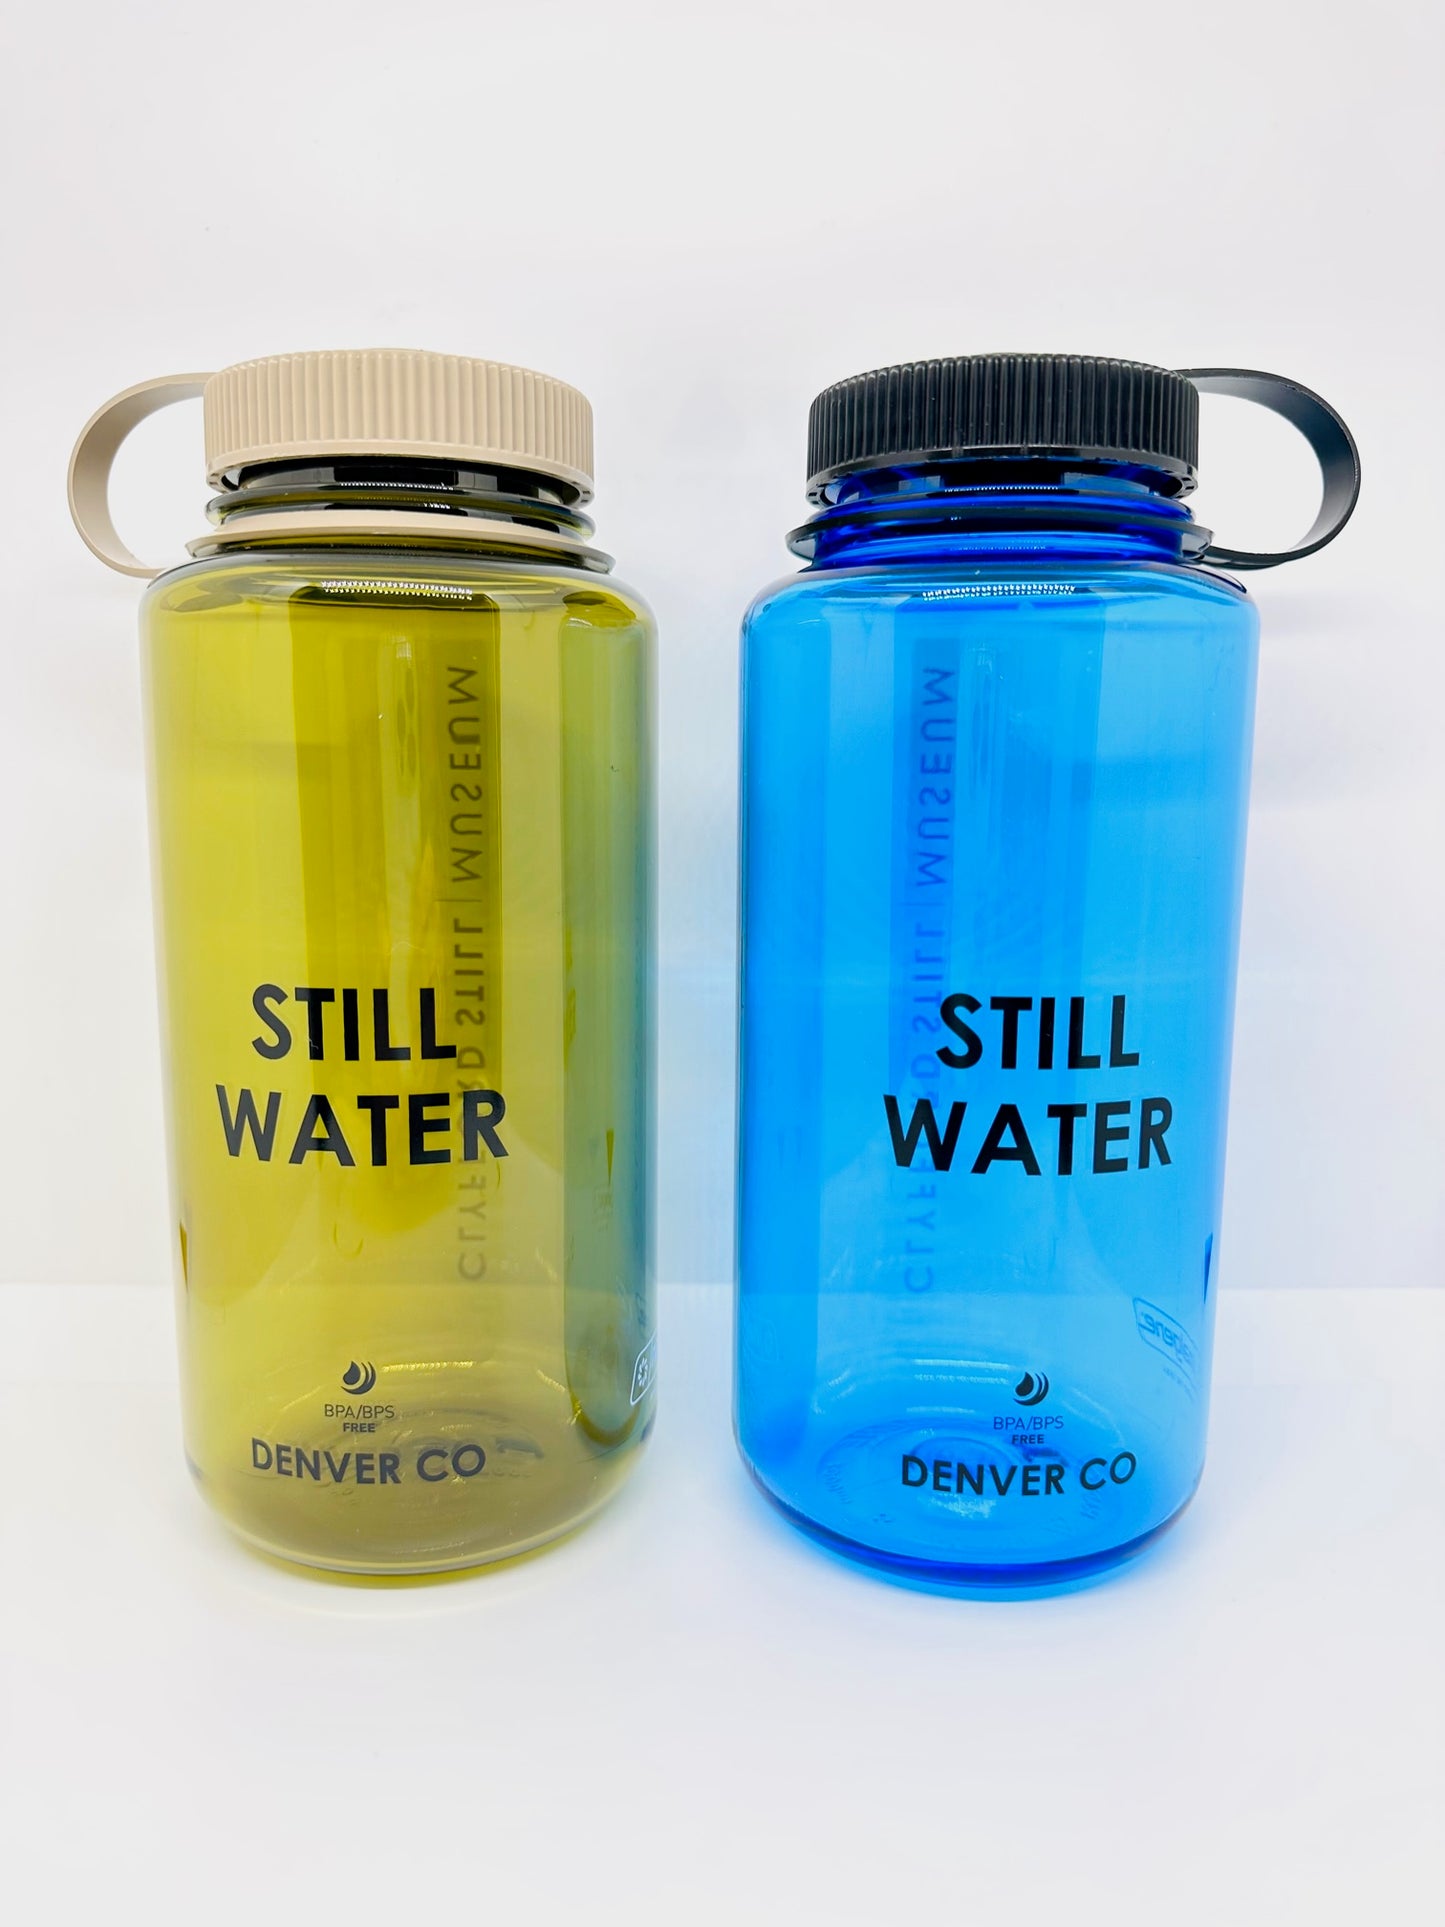 Two Nalgene's classic 32oz wide-mouth water bottle with slogan “STILL WATER”. Olive with mocha cap on left, slate blue with black cap on right.